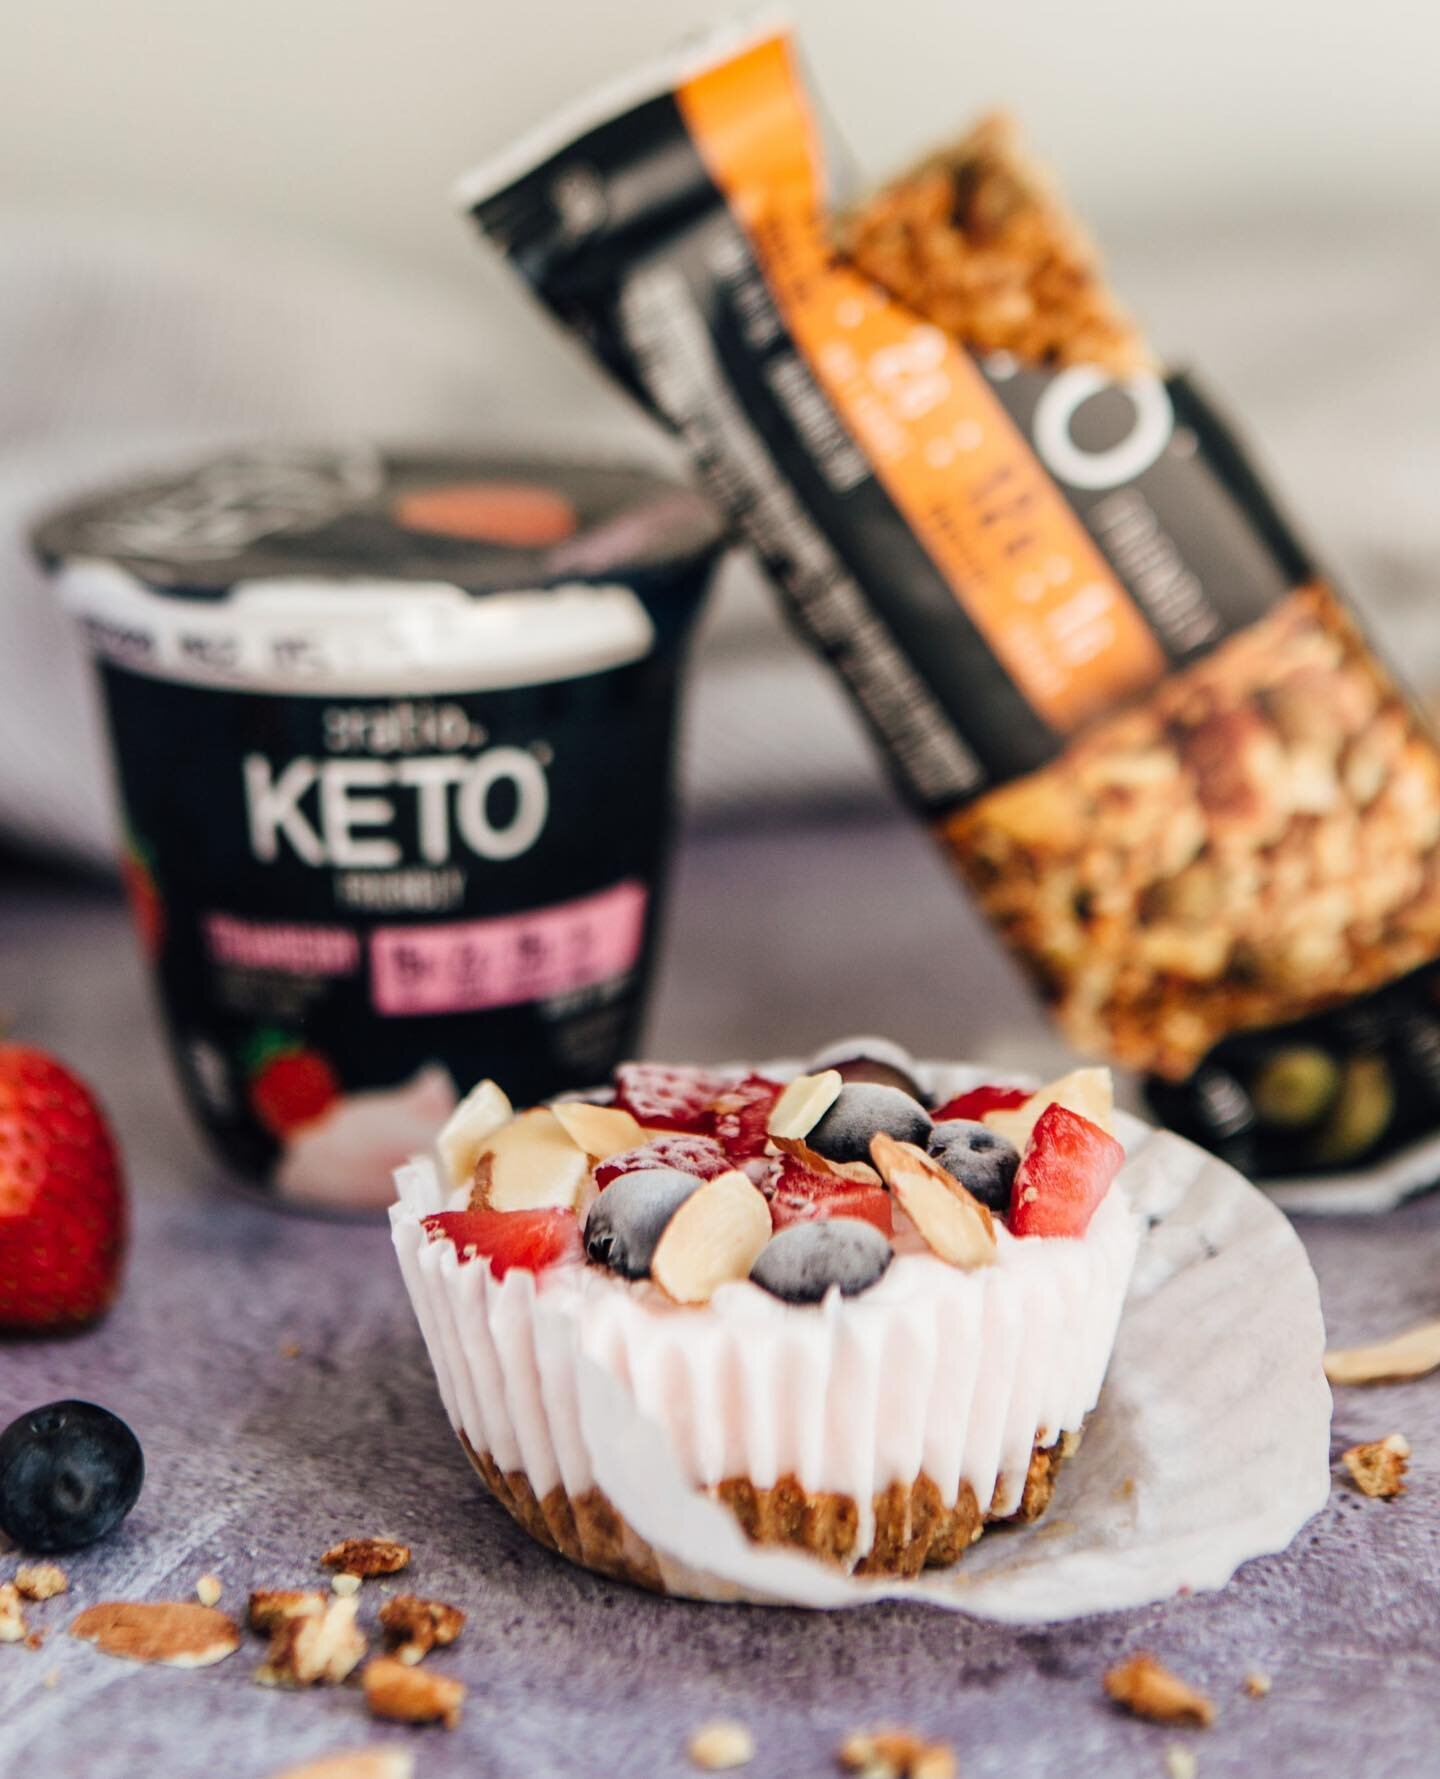 Have you ever made frozen cupcakes?! #ad ❤️I&rsquo;m all about no bake dessert options these days and this one is my new favorite and I love the crunchy bar crust! ⁠⠀
⠀⠀⠀⠀⠀⠀⠀⠀⠀⁠⠀
⠀⠀⠀⠀⠀⠀⠀⠀⠀⁠⠀
Ingredients:⁠⠀
2 cartons of Strawberry :ratio KETO* Friendl